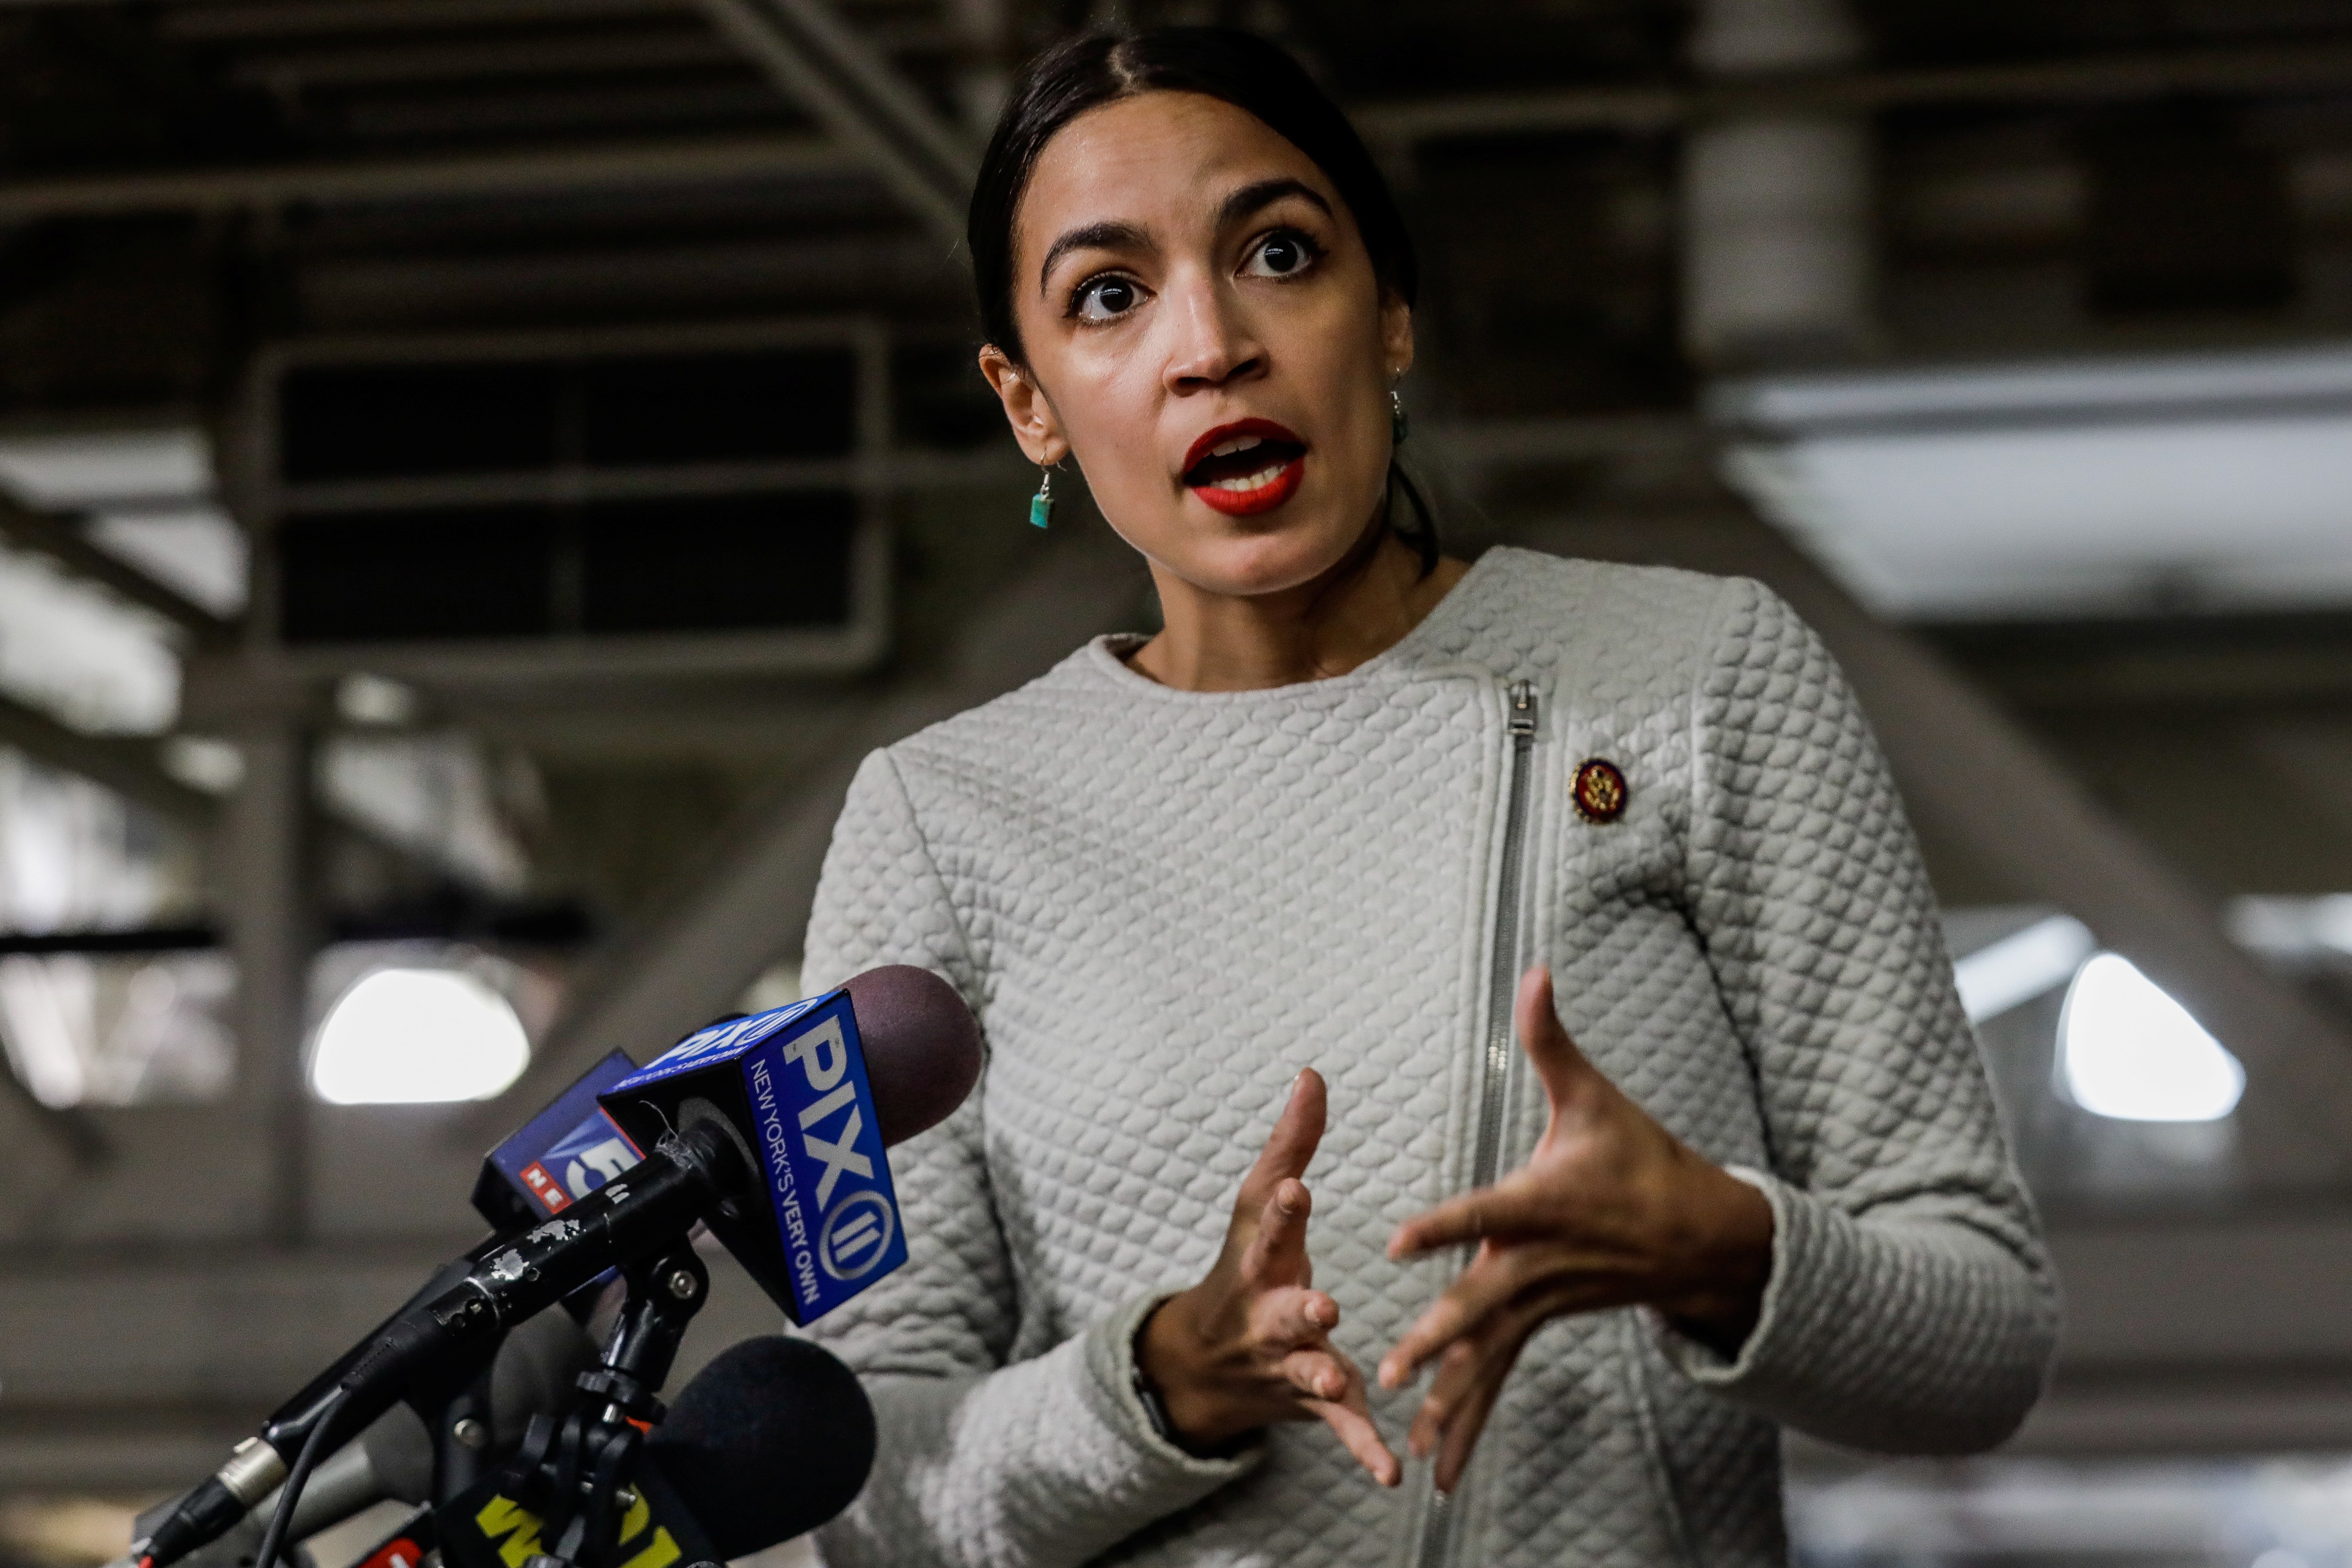 U.S. Representative Alexandria Ocasio-Cortez (D-NY) speaks during the press conference before the town hall meeting in the Queens borough of New York City